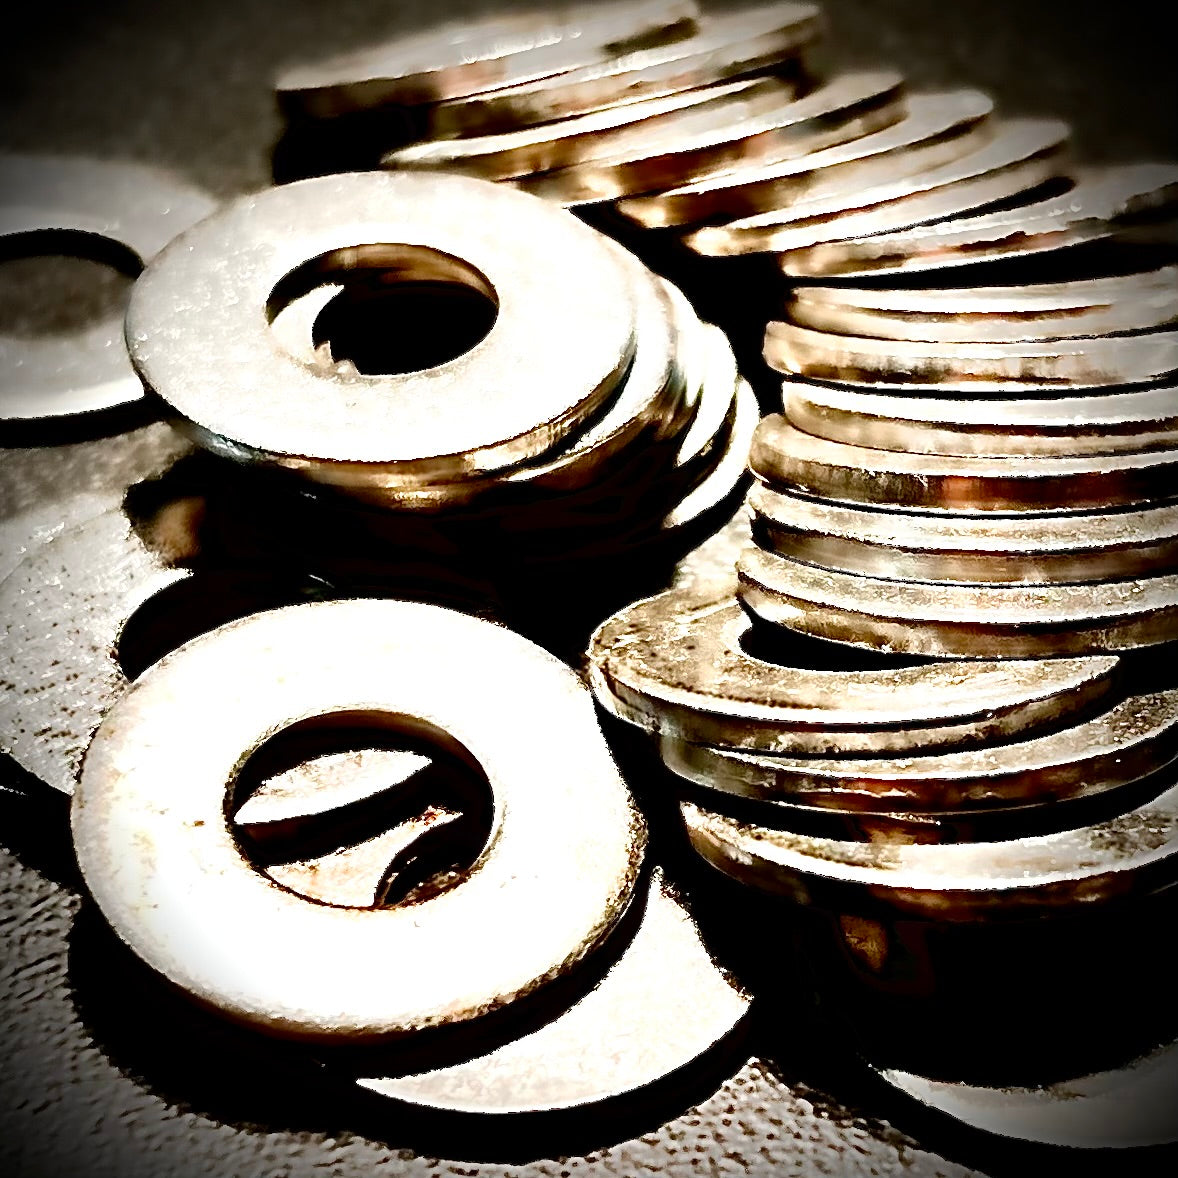 Metric Washers, Form C, A2/ 304 Stainless Steel Washers Metric Washers, Form C, A2/ 304 Stainless Steel Washers - Form C